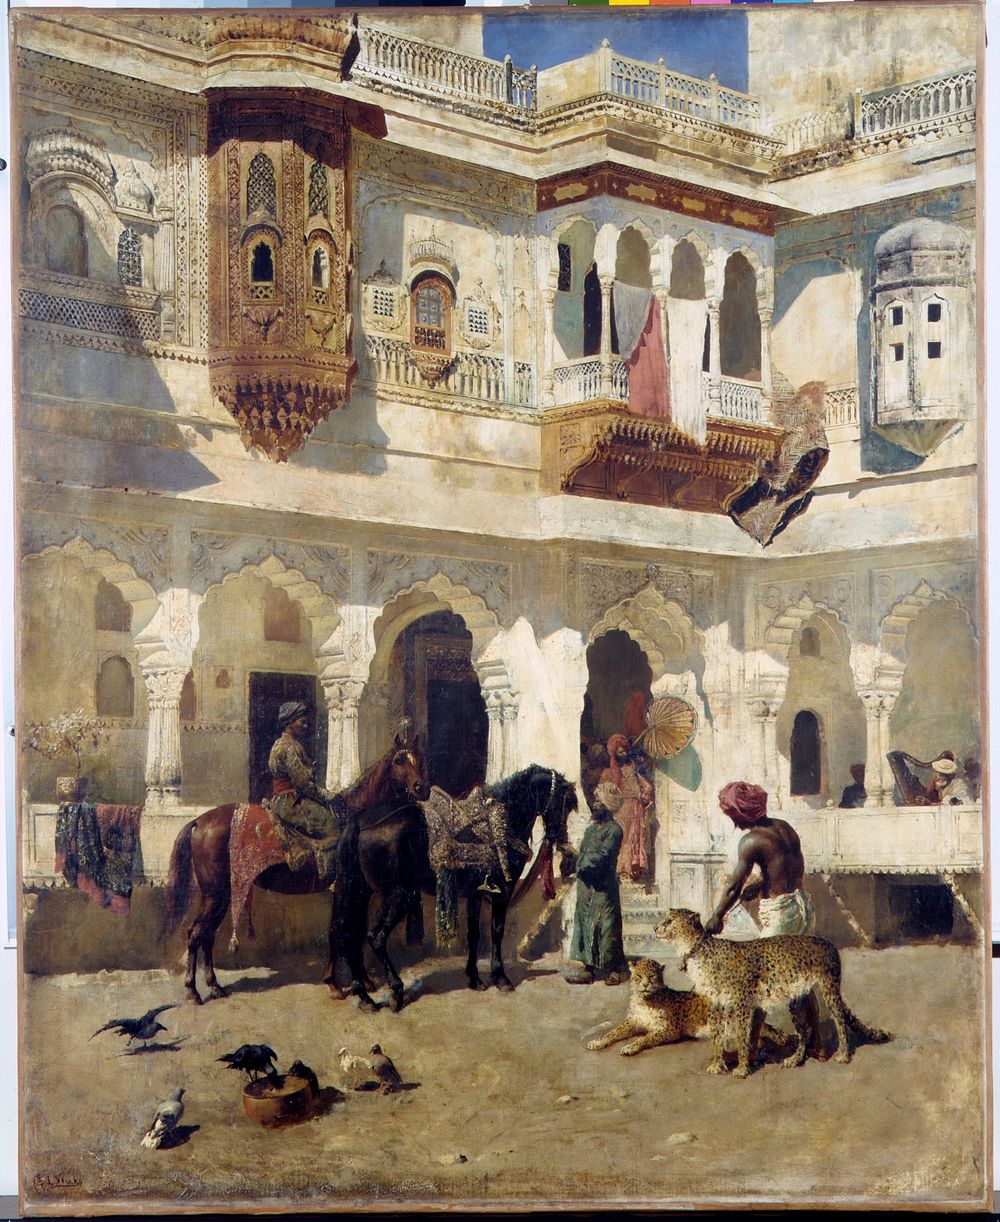 The Rajah Starting on a Hunt by Edwin Lord Weeks